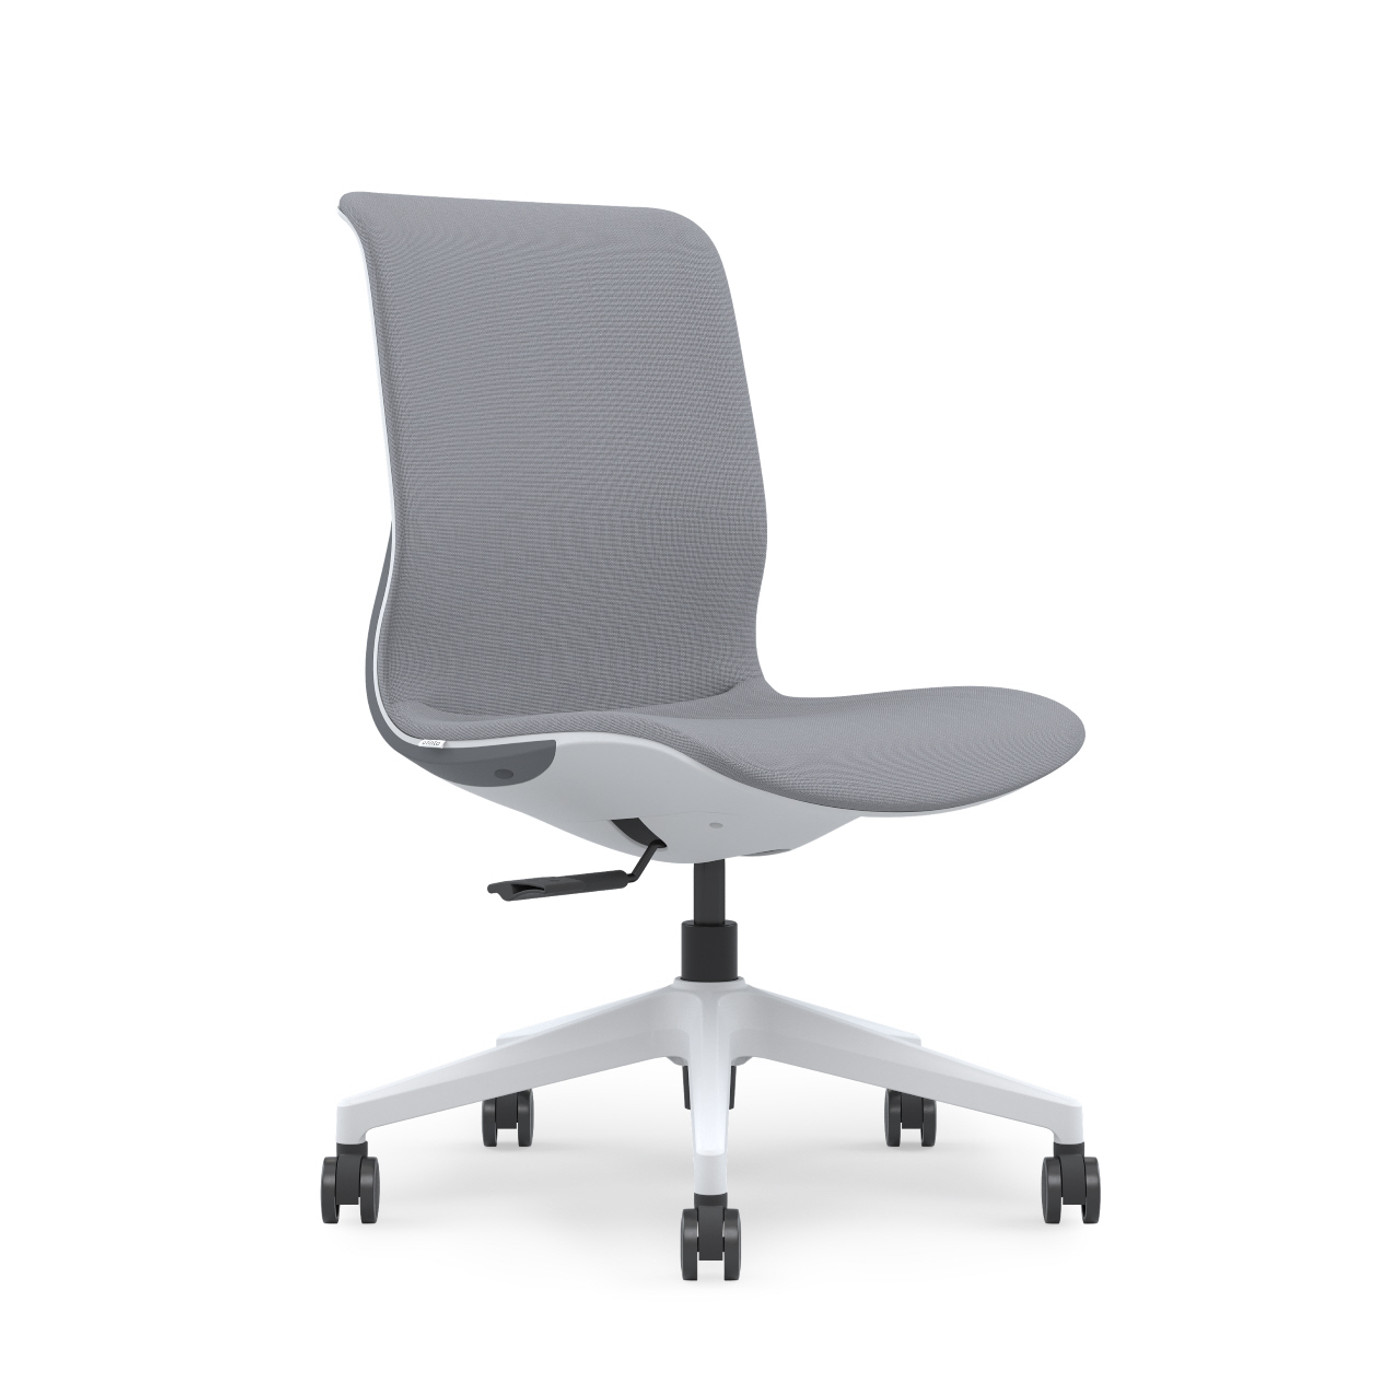 WhiteWithout armrests